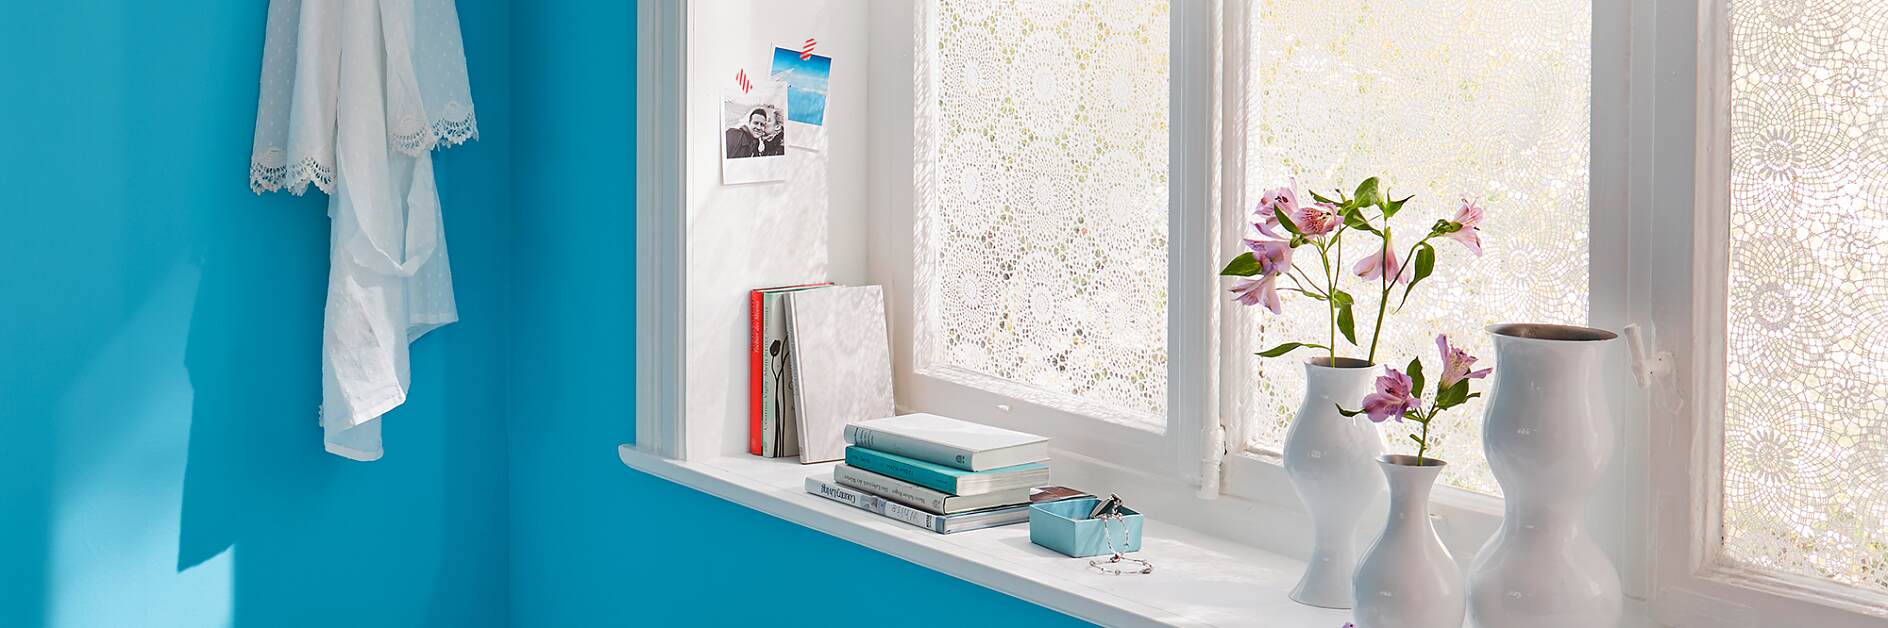 Make your own lace window treatments